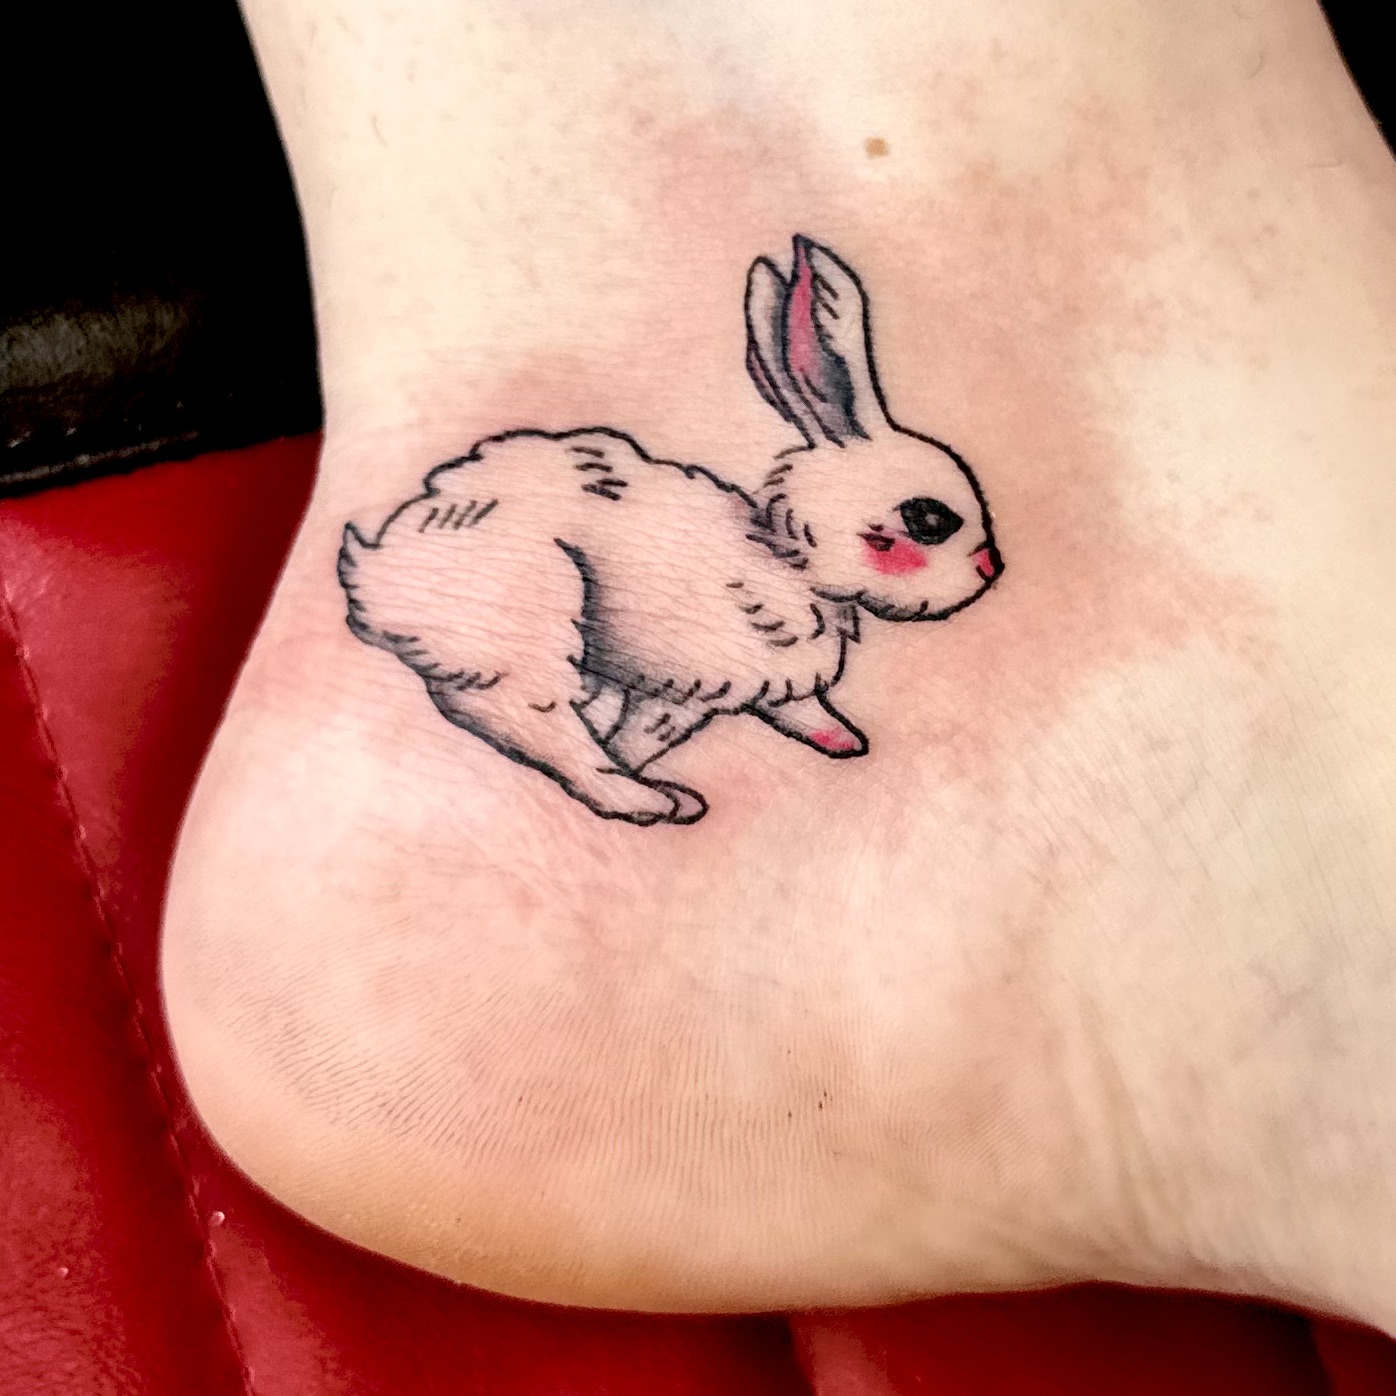 Small tattoo of a bunny on an ankle